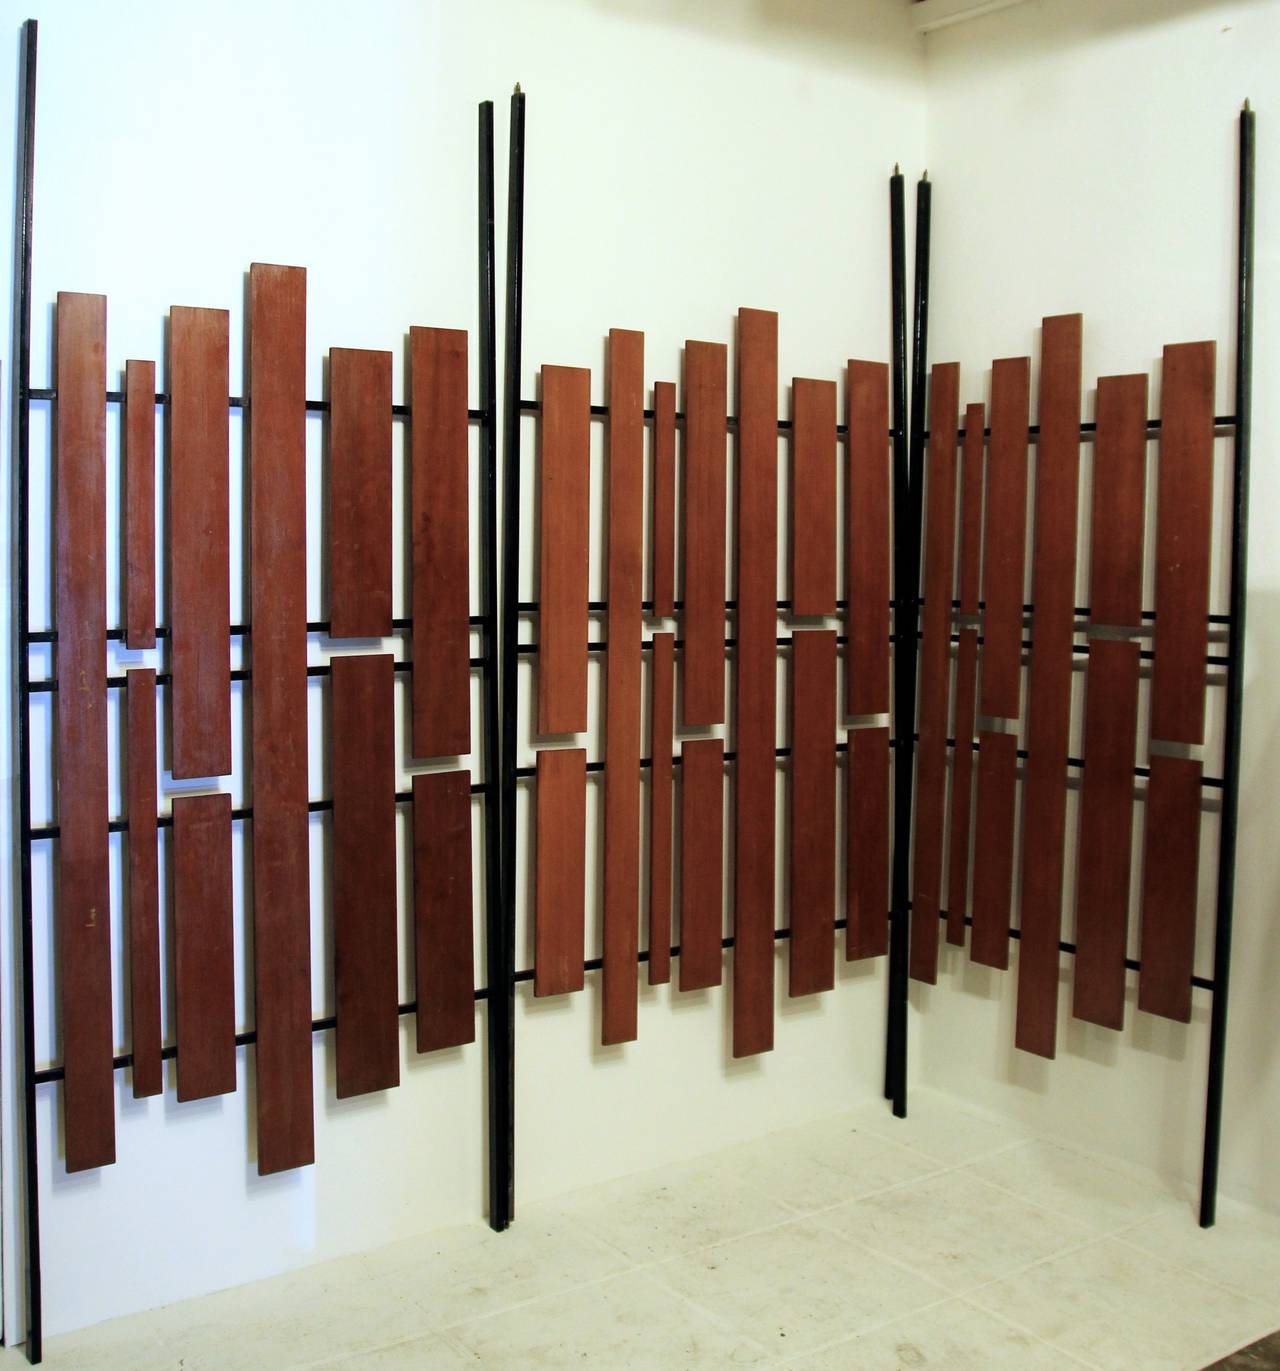 Set of three screens, wood and iron, circa 1960, Italy.
Measurement of panels:
1. Height: 2m78, width: 1M12,
2. Height: 2m78, width: 1M12,
3. Height: 2m78, width: 1.32m.
Total width: 3m56.
Each depth: 4.5 cm.